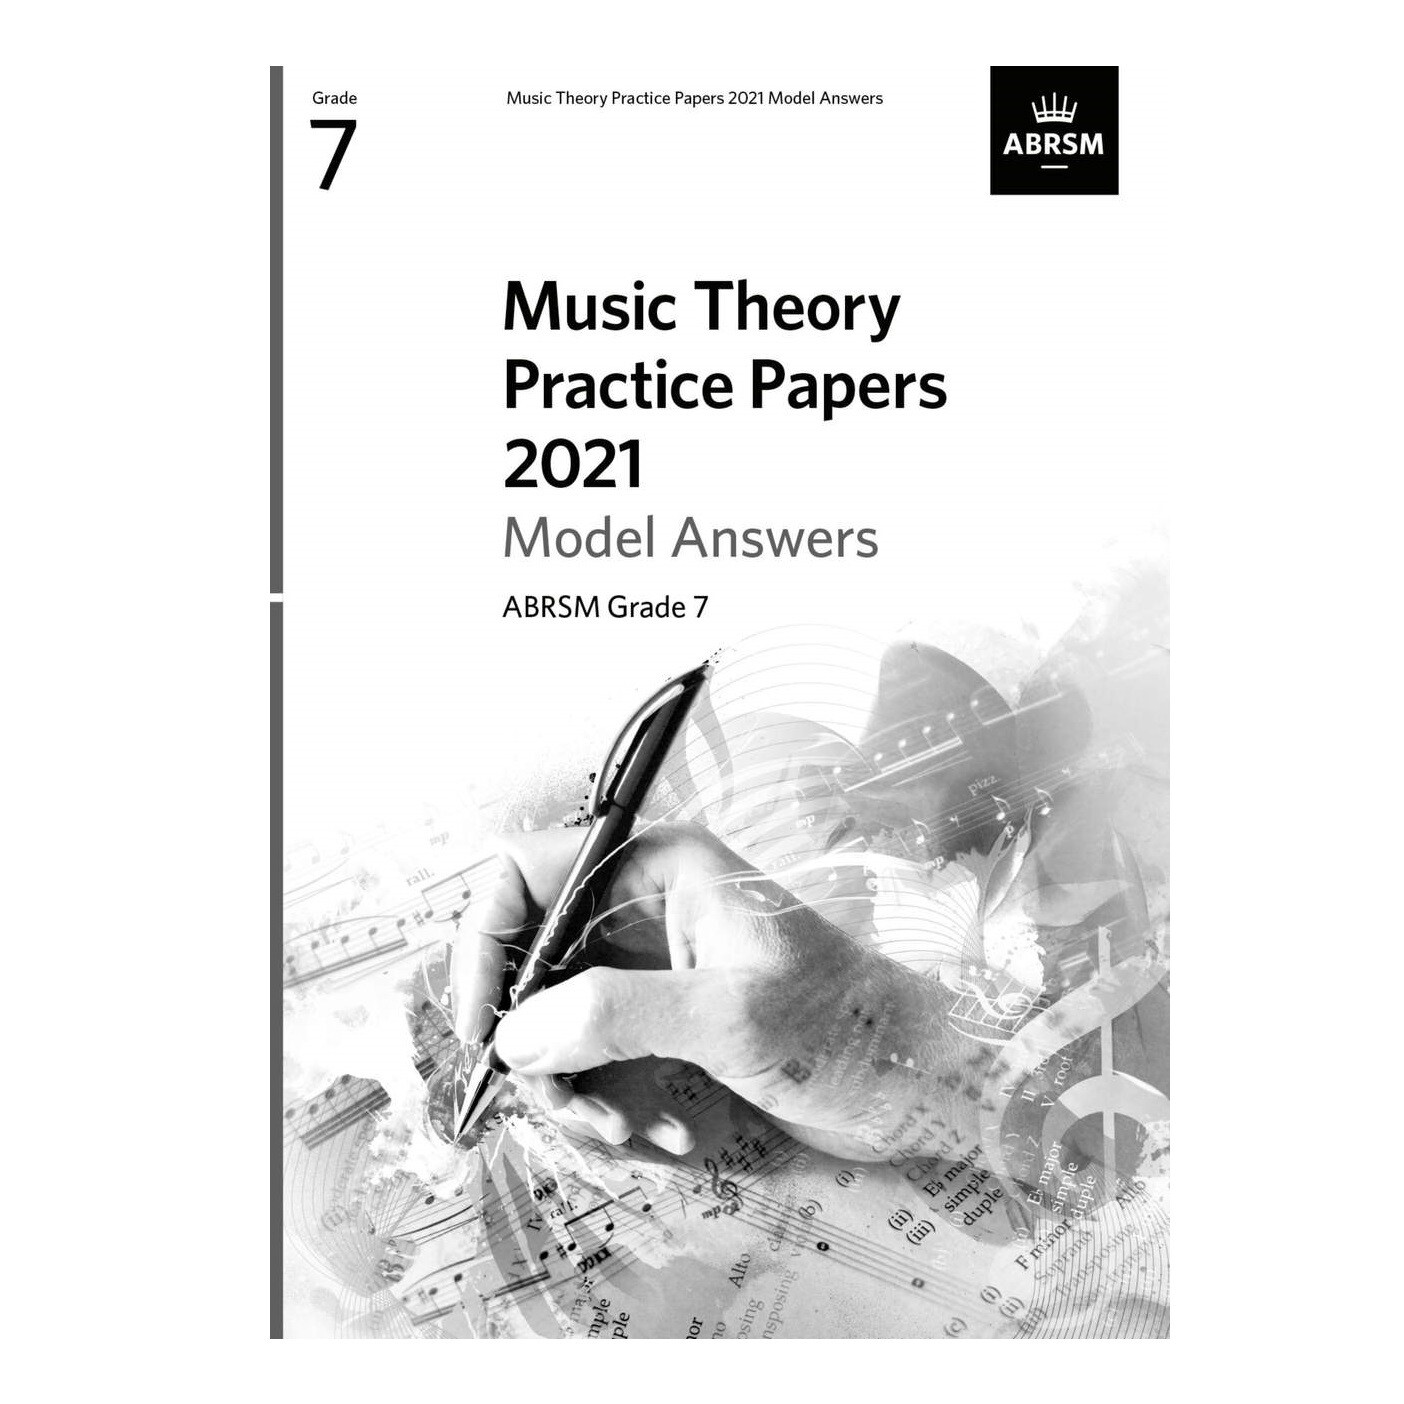 ABRSM Music Theory Practice Papers 2021 Model Answers: Grade 7